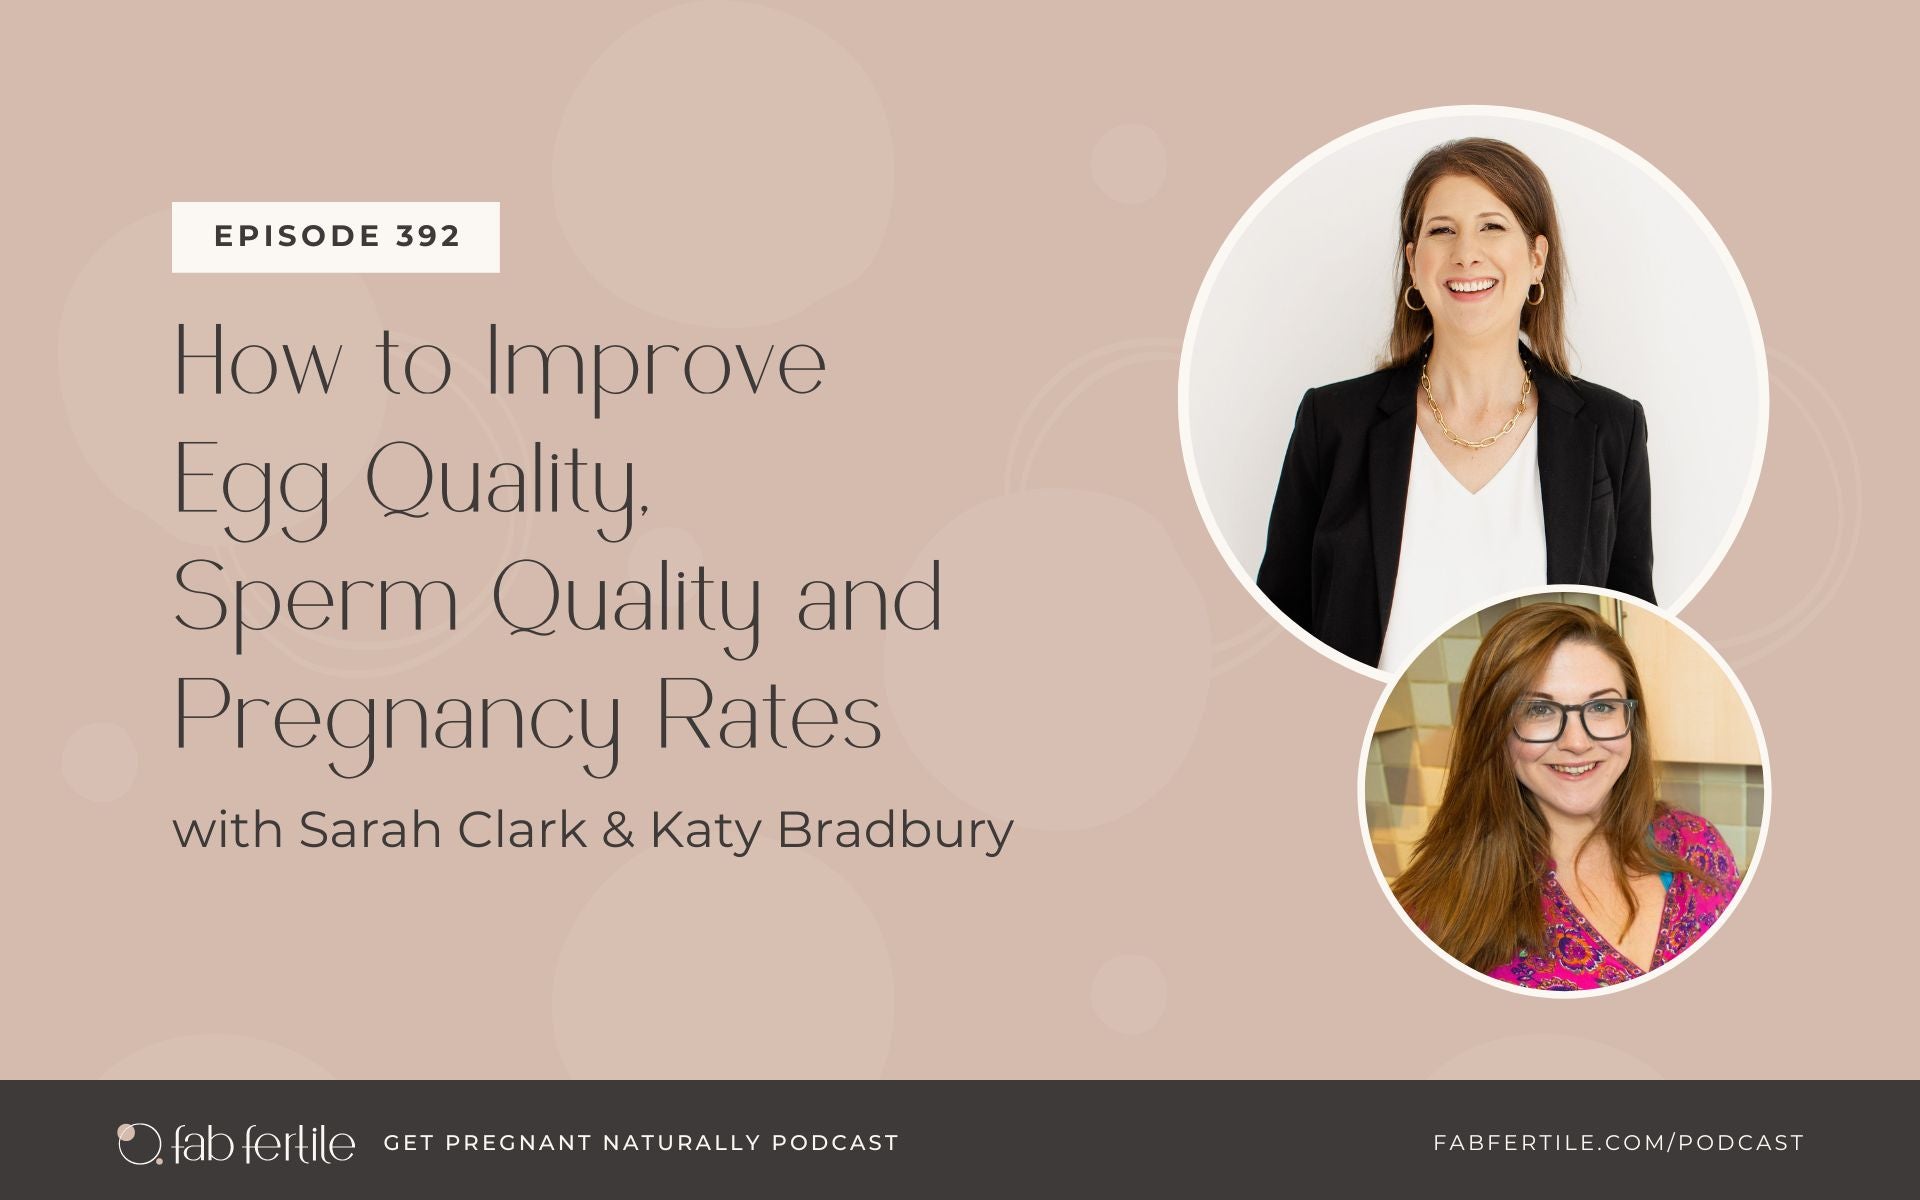 How to Improve Egg Quality, Sperm Quality and Pregnancy Rates